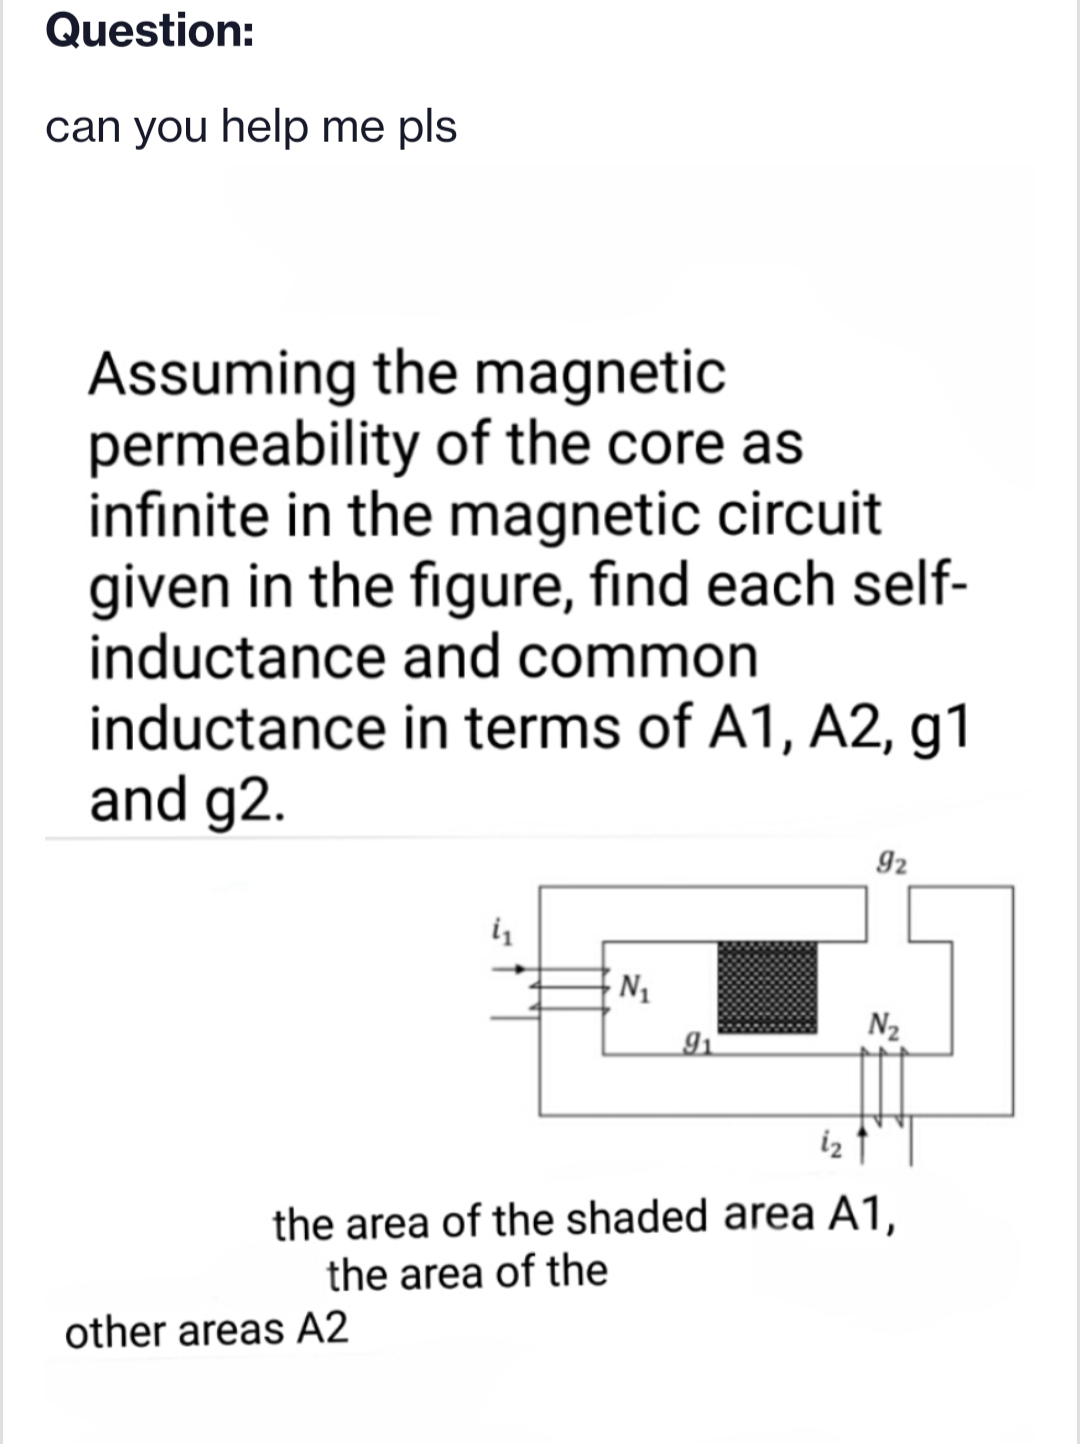 Question:
can you help me pls
Assuming the magnetic
permeability of the core as
infinite in the magnetic circuit
given in the figure, find each self-
inductance and common
inductance in terms of A1, A2, g1
and g2.
92
N2
iz
the area of the shaded area A1,
the area of the
other areas A2
